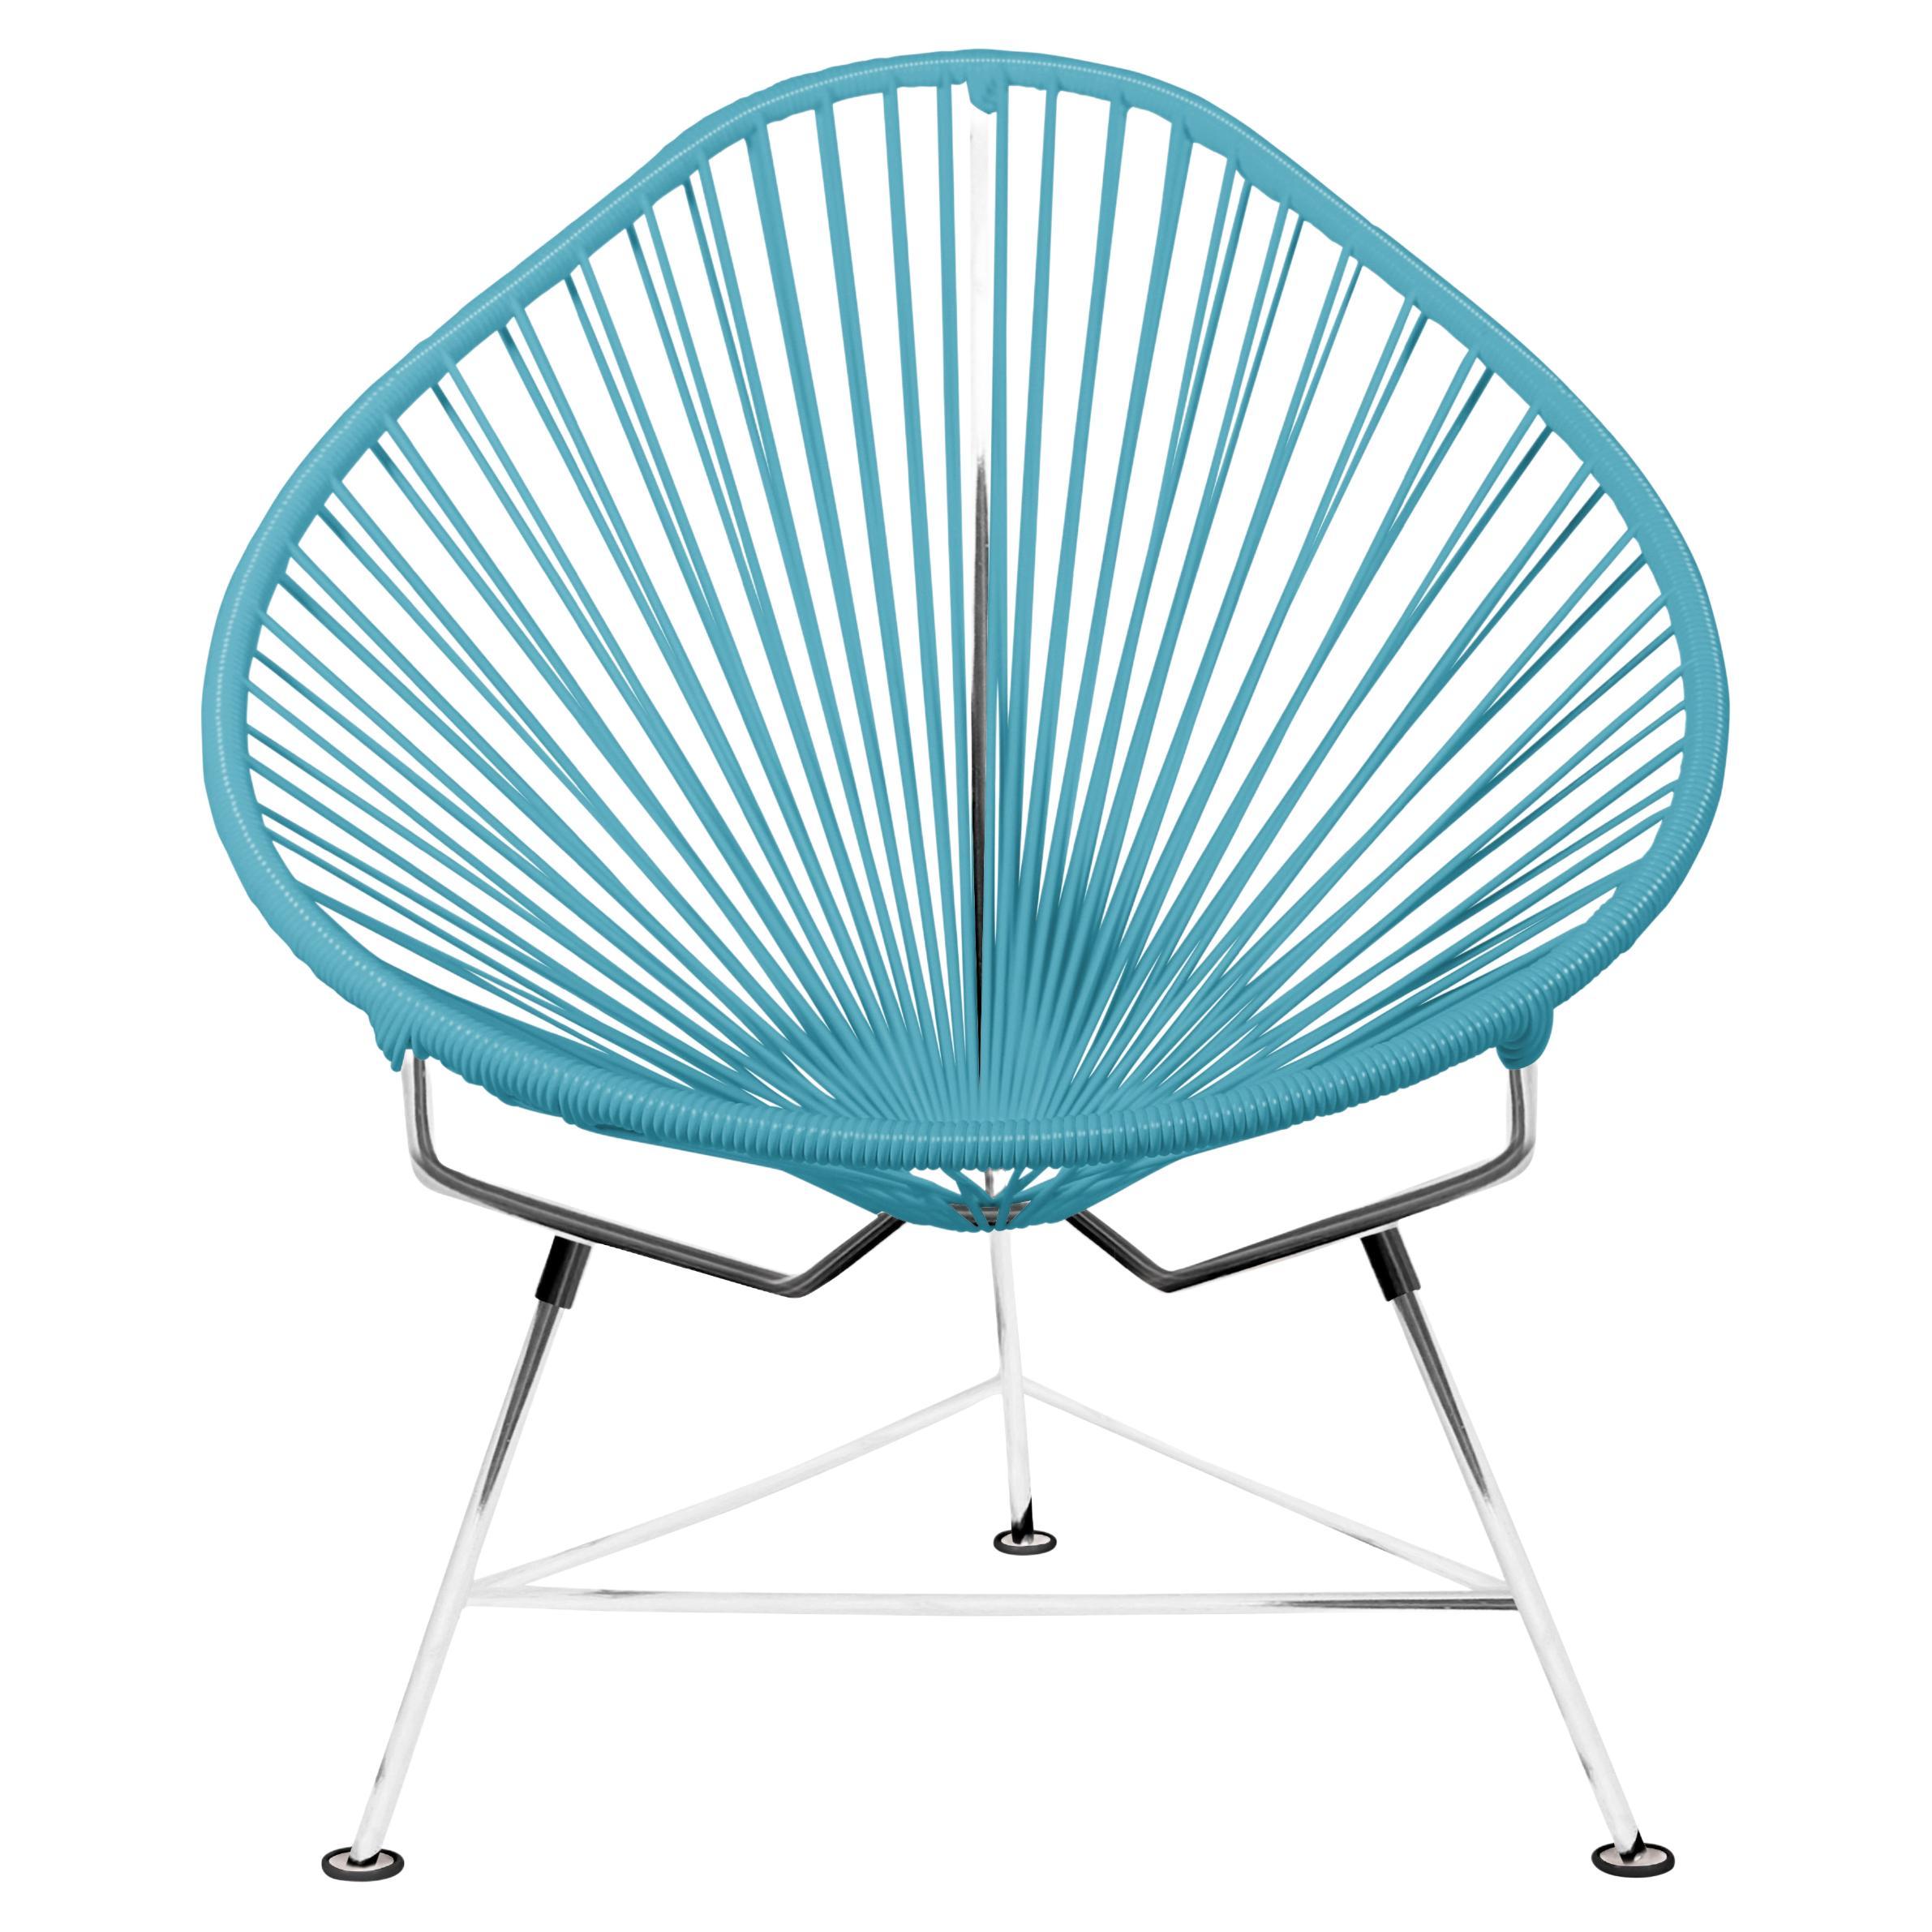 Innit Designs Acapulco Chair Blue Weave on Chrome Frame For Sale